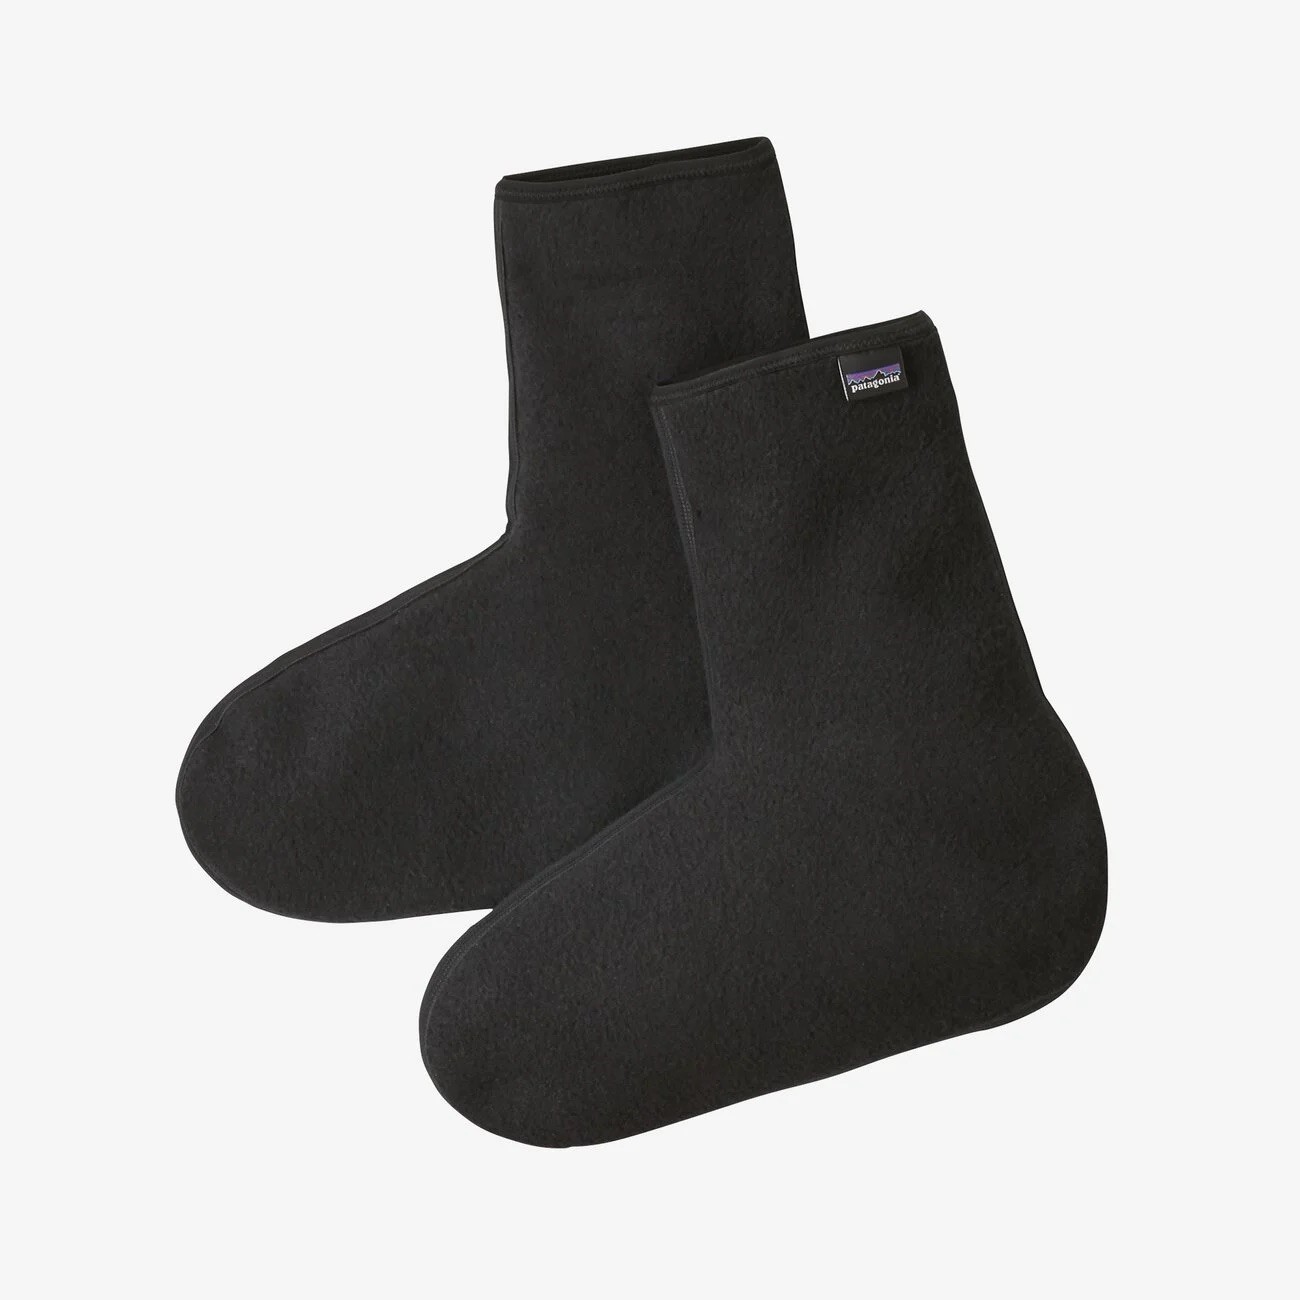 Patagonia Winter Weight Fleece Oversocks - Black - Extra Large